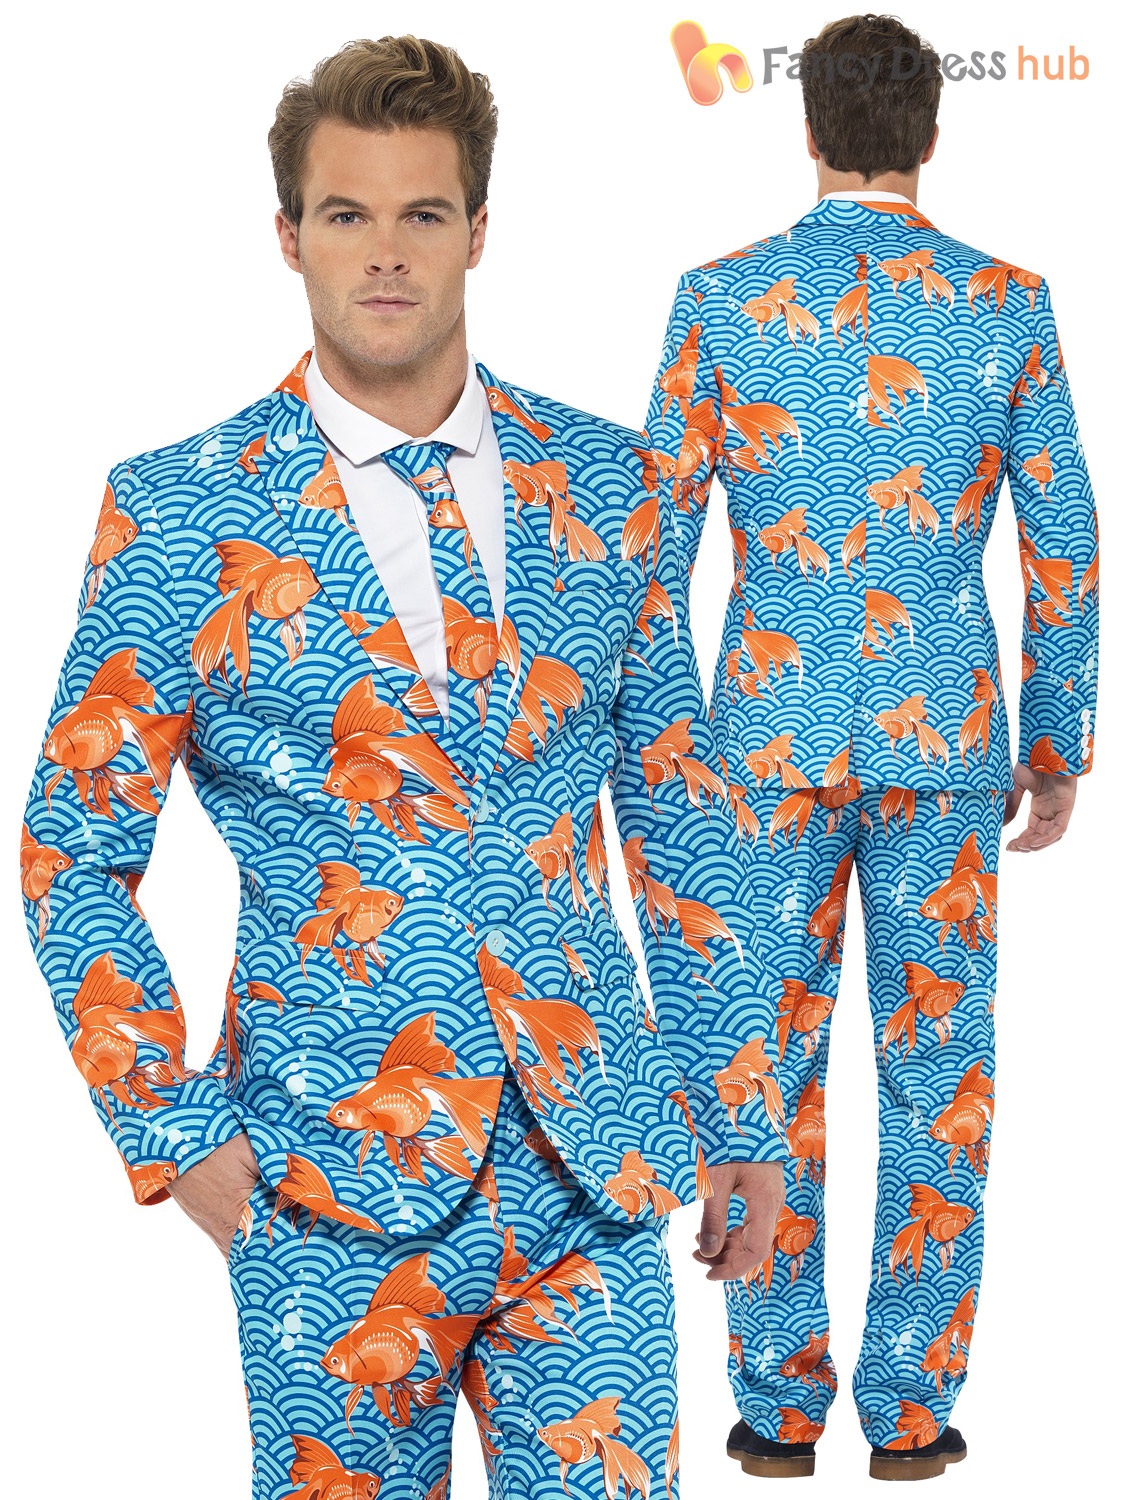 Sky High Stand Out Suit Mens Fancy Dress Stag Party Costume Dresup